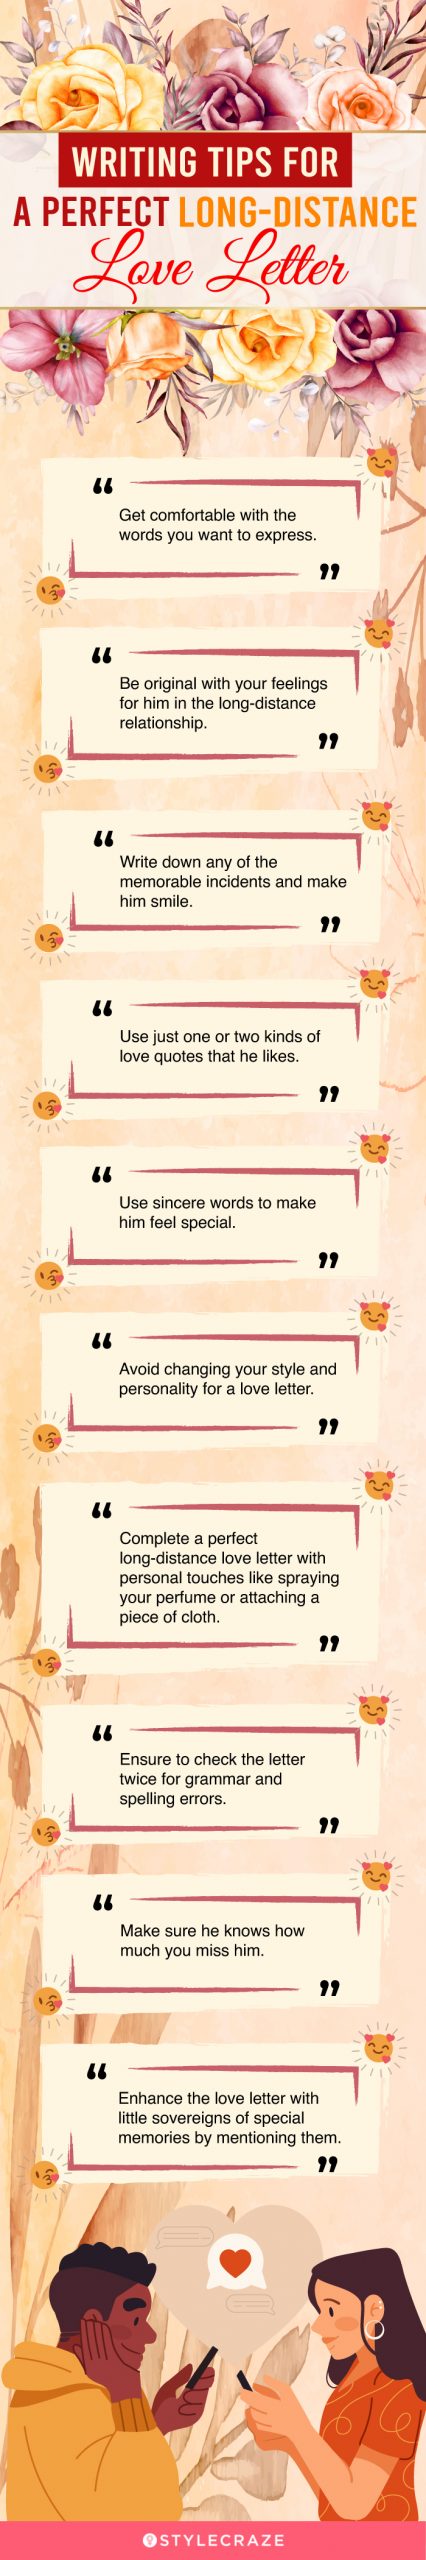 writing tips for a perfect long distance love letter [infographic]